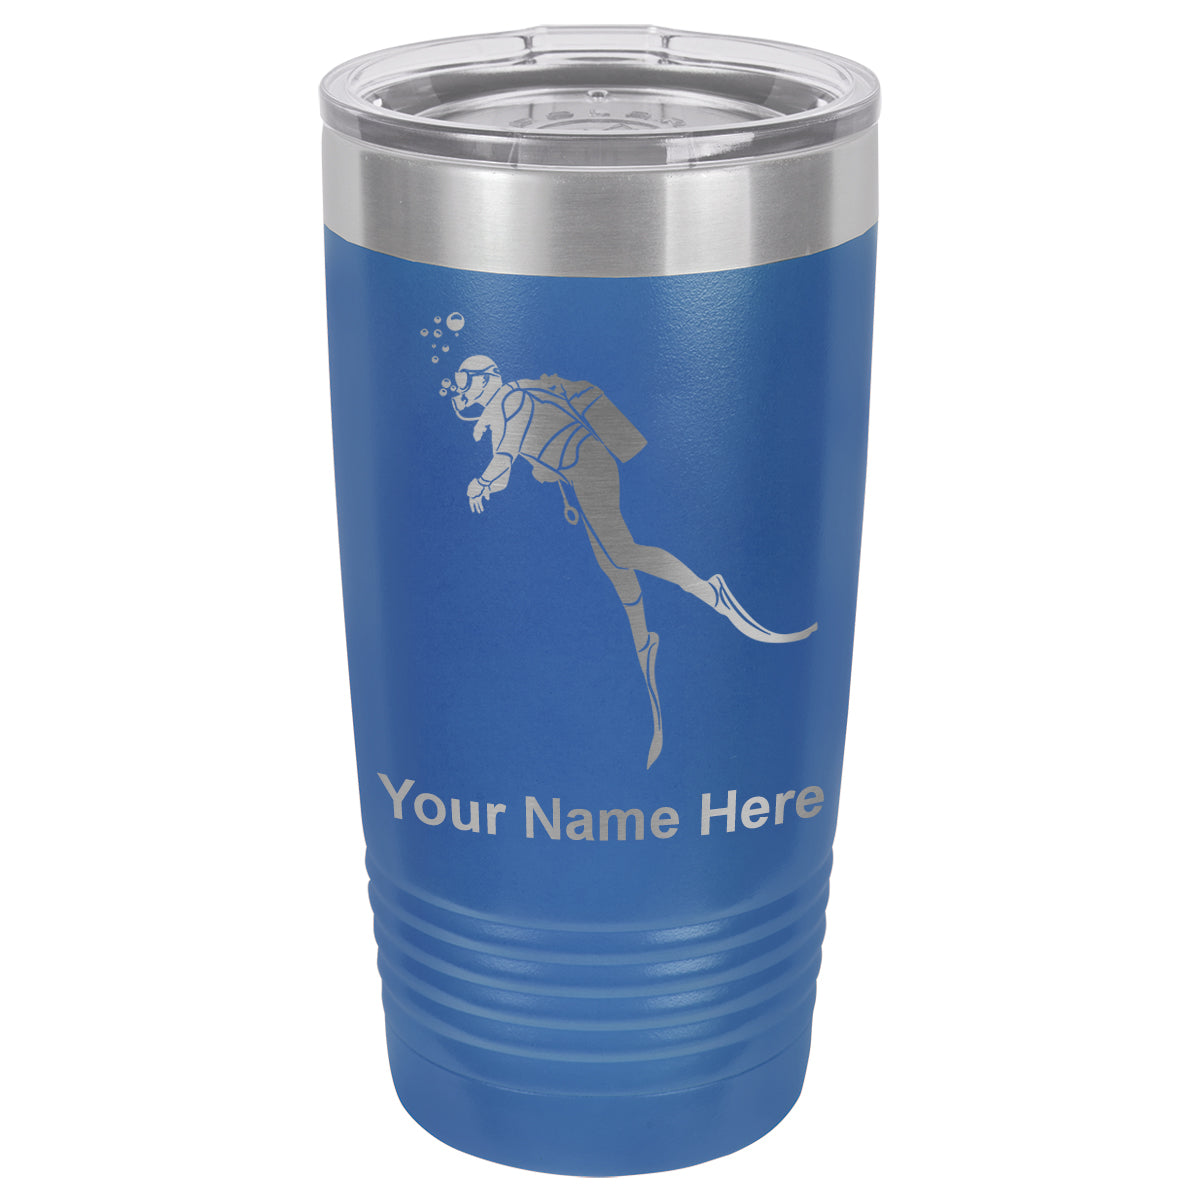 20oz Vacuum Insulated Tumbler Mug, Scuba Diver, Personalized Engraving Included